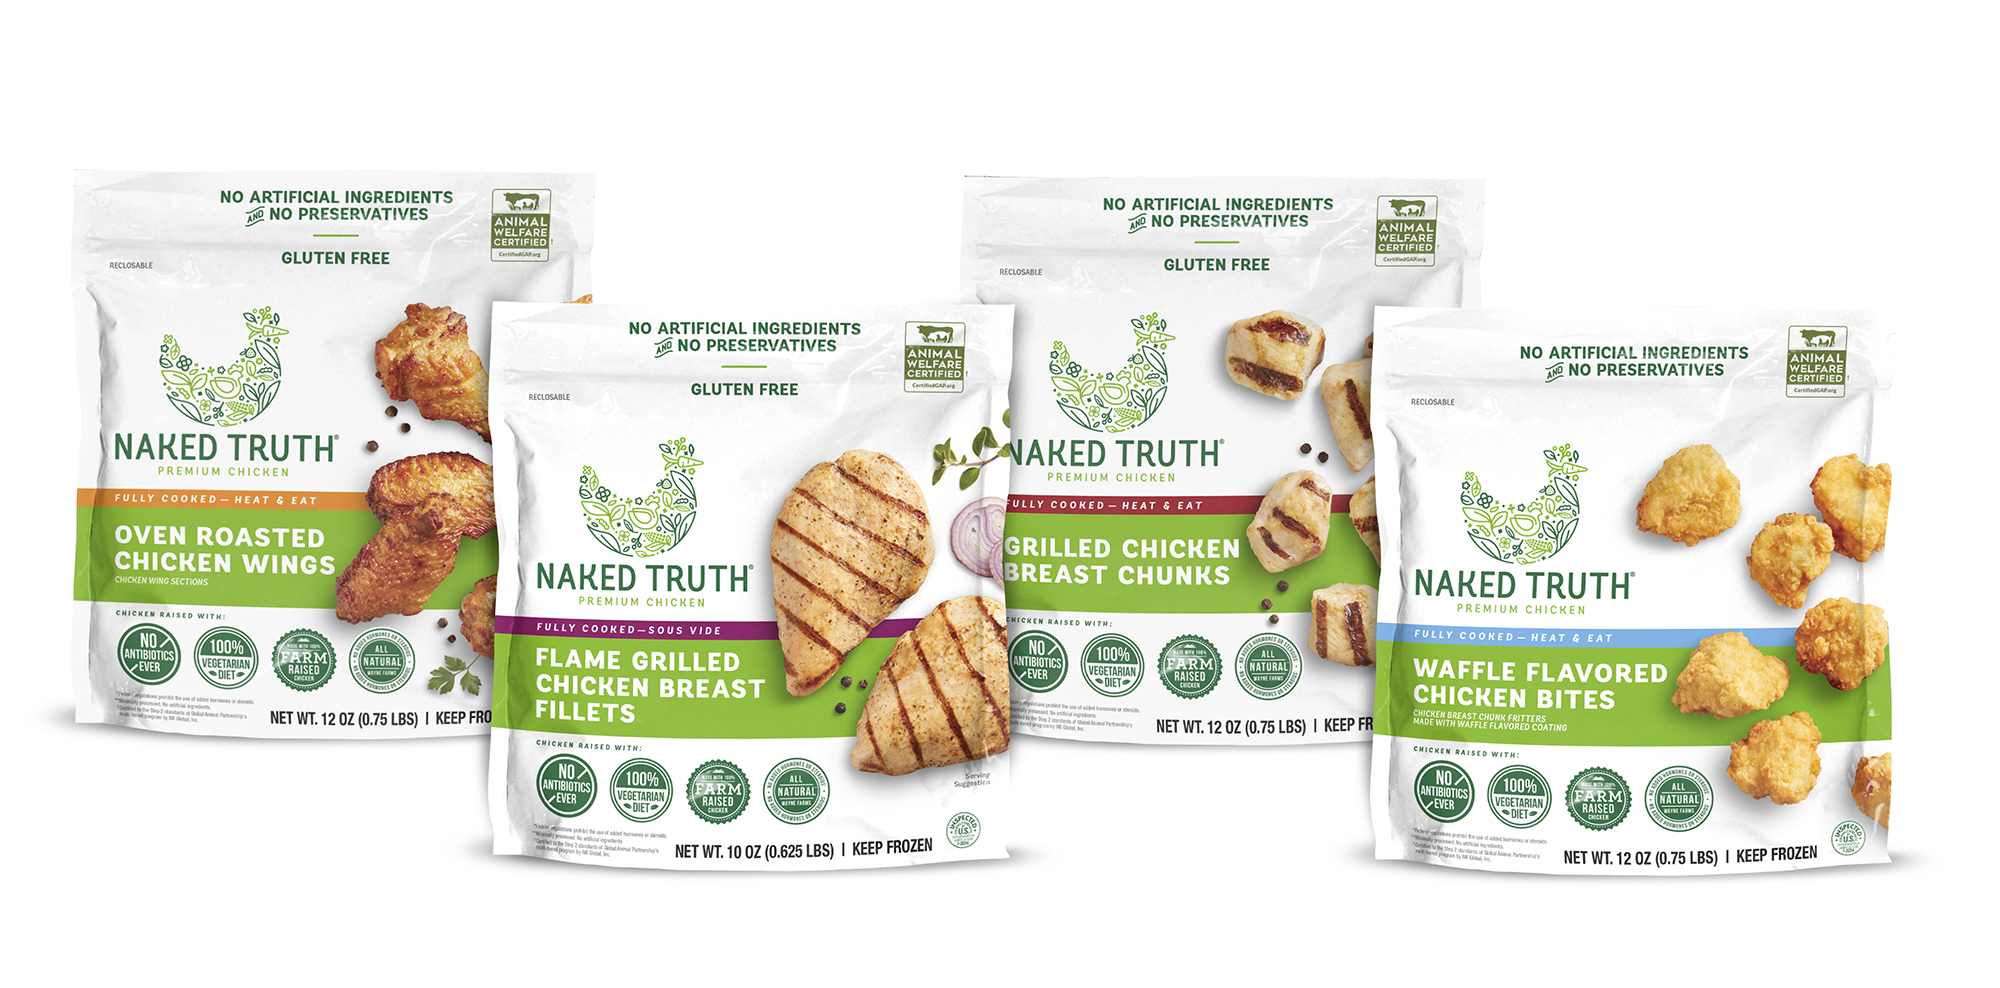 Naked Truth Premium Chicken Products Available in Whole Foods Market